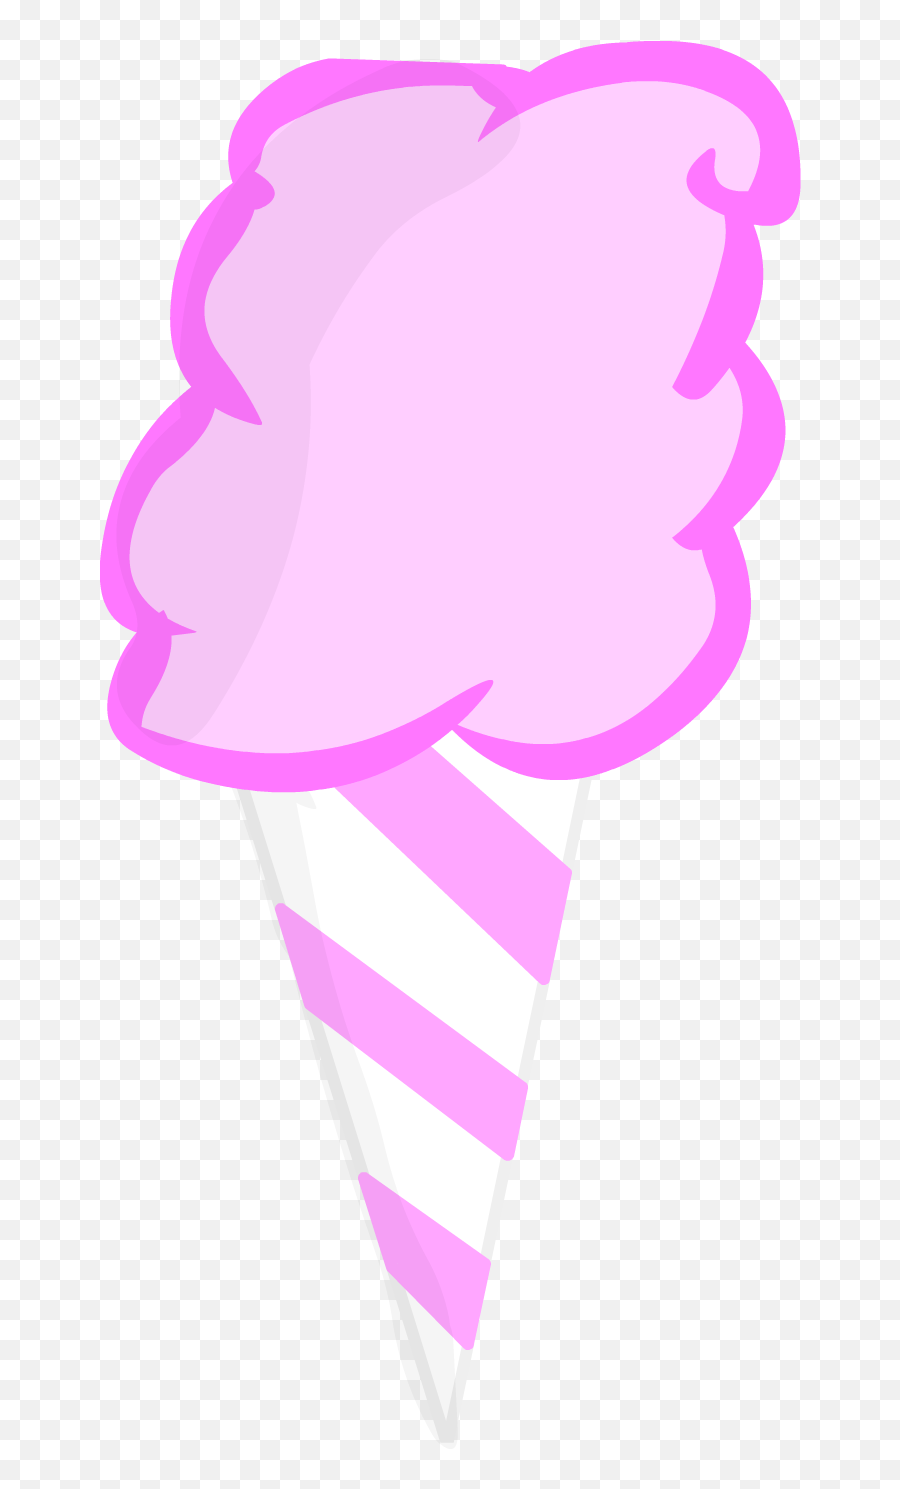 Candy Png - Object Show Cotton Candy 488577 Vippng Bfdi Cotton Candy Body,Candy Png